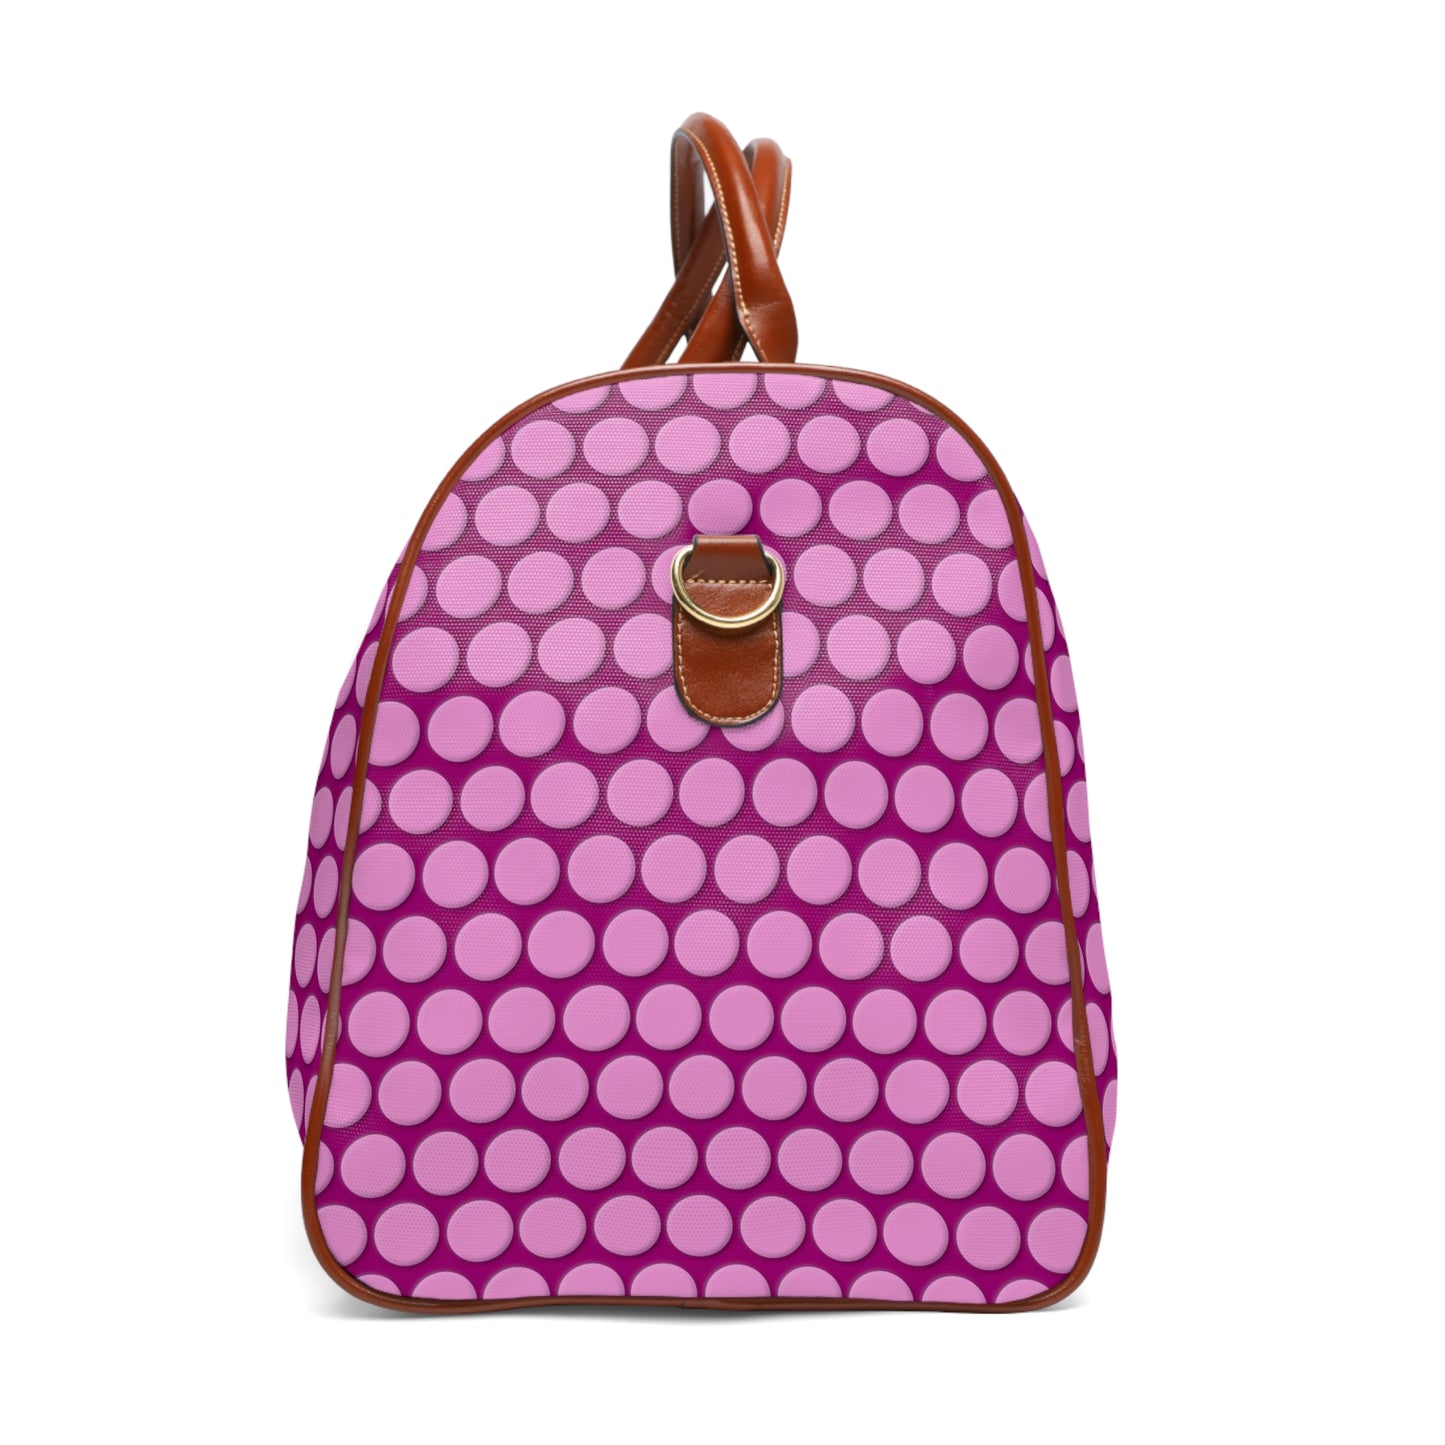 Dots for Days - Waterproof Travel Bag